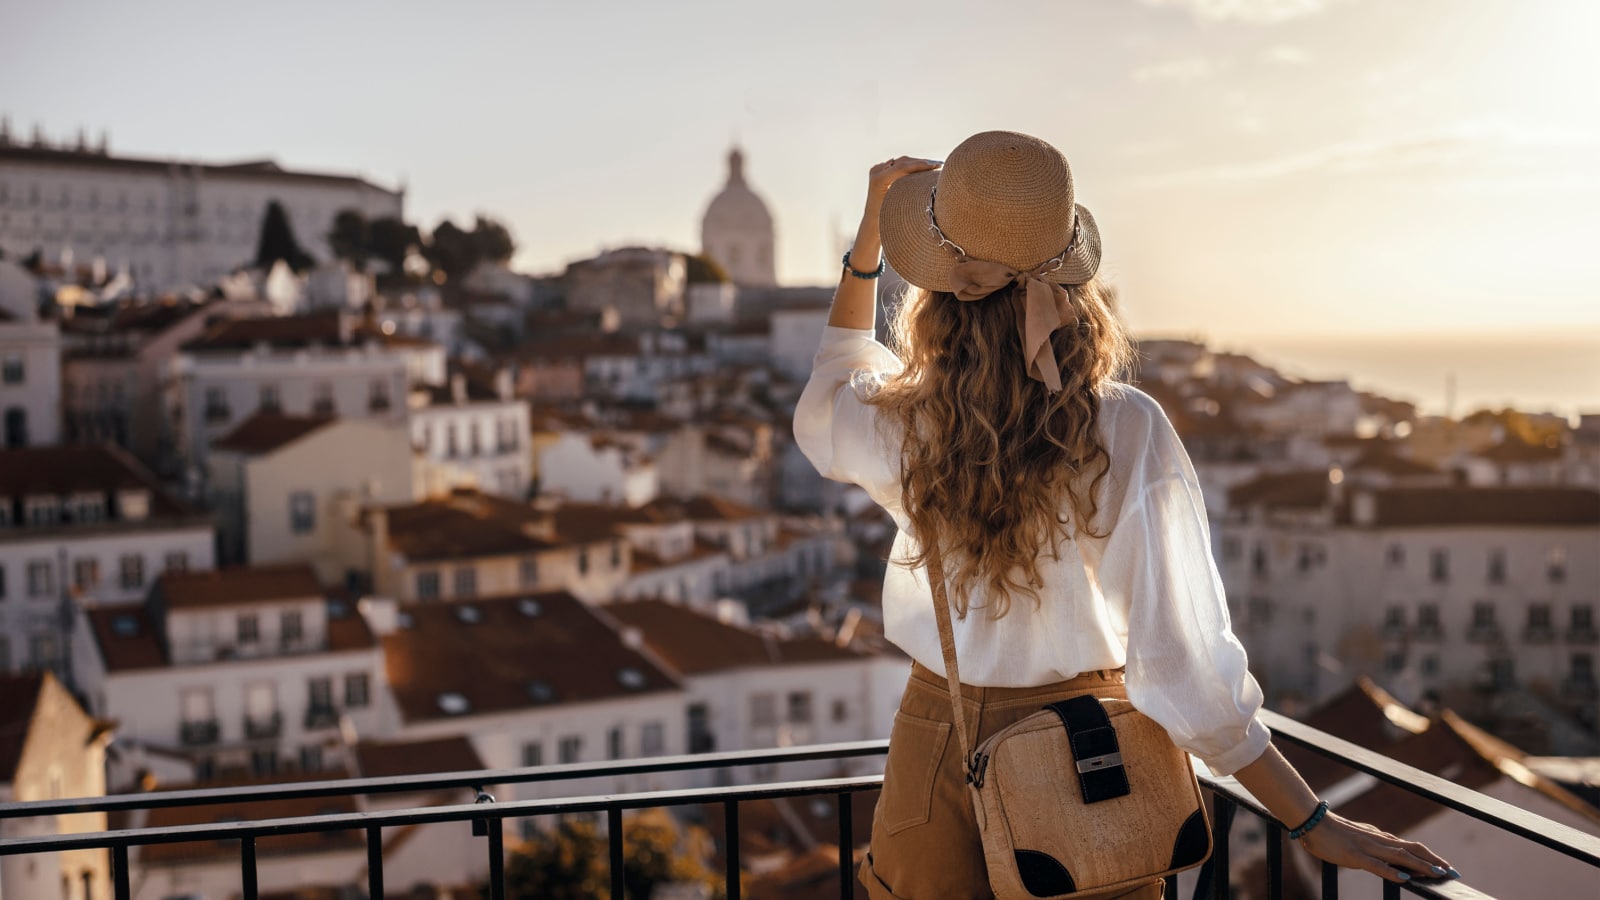 Blonde woman standing on the balcony and looking at coast view of the southern european city with sea during the sunset, wearing hat, cork bag, safari shorts and white shirt